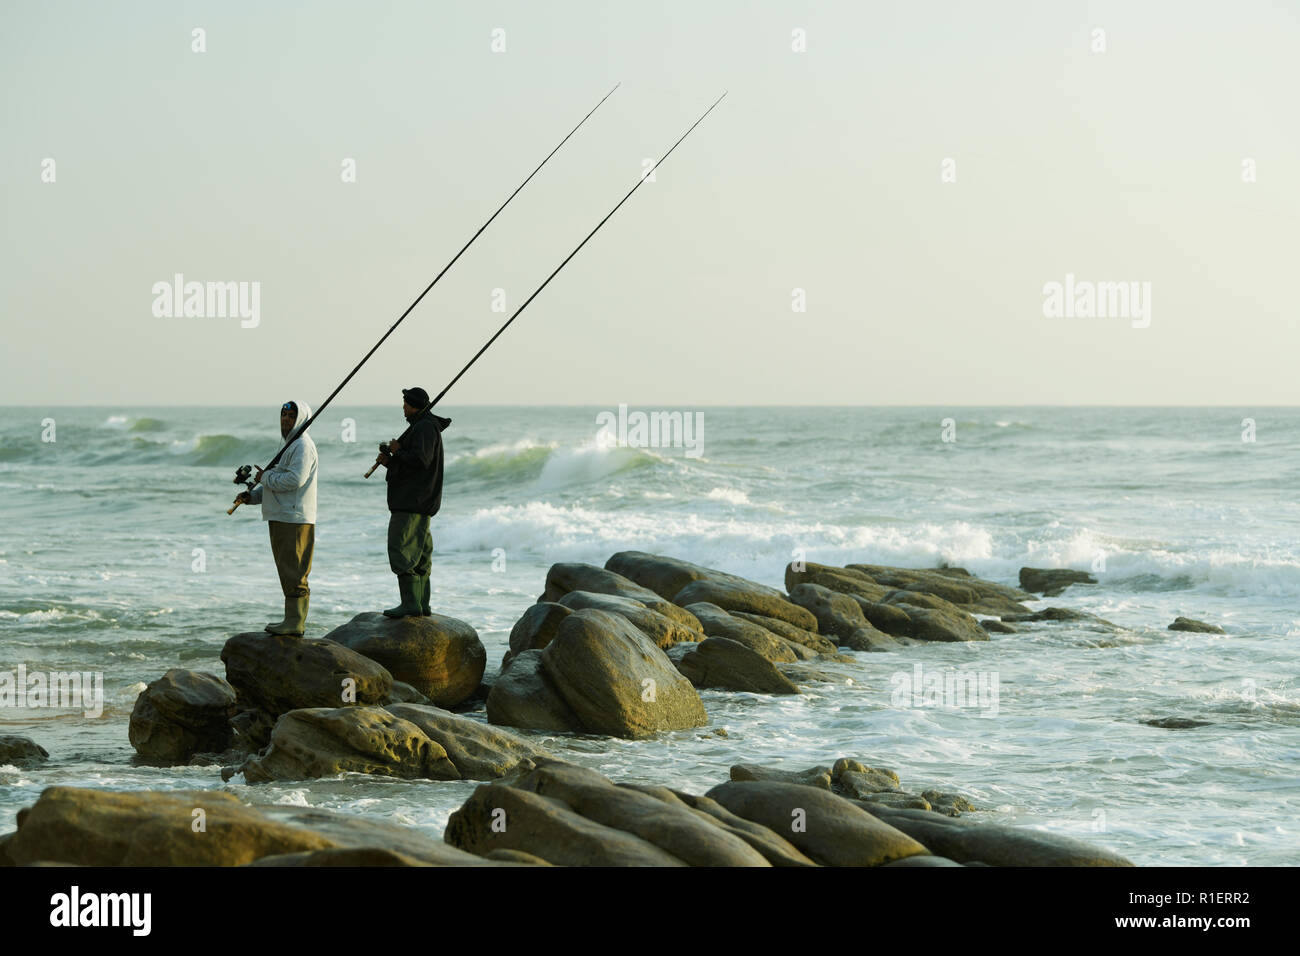 Durban, KwaZulu-Natal, two adult male fishermen in waterproof clothing standing on wet rocks with fishing rods to catch fish at Umhlanga Rocks beach Stock Photo